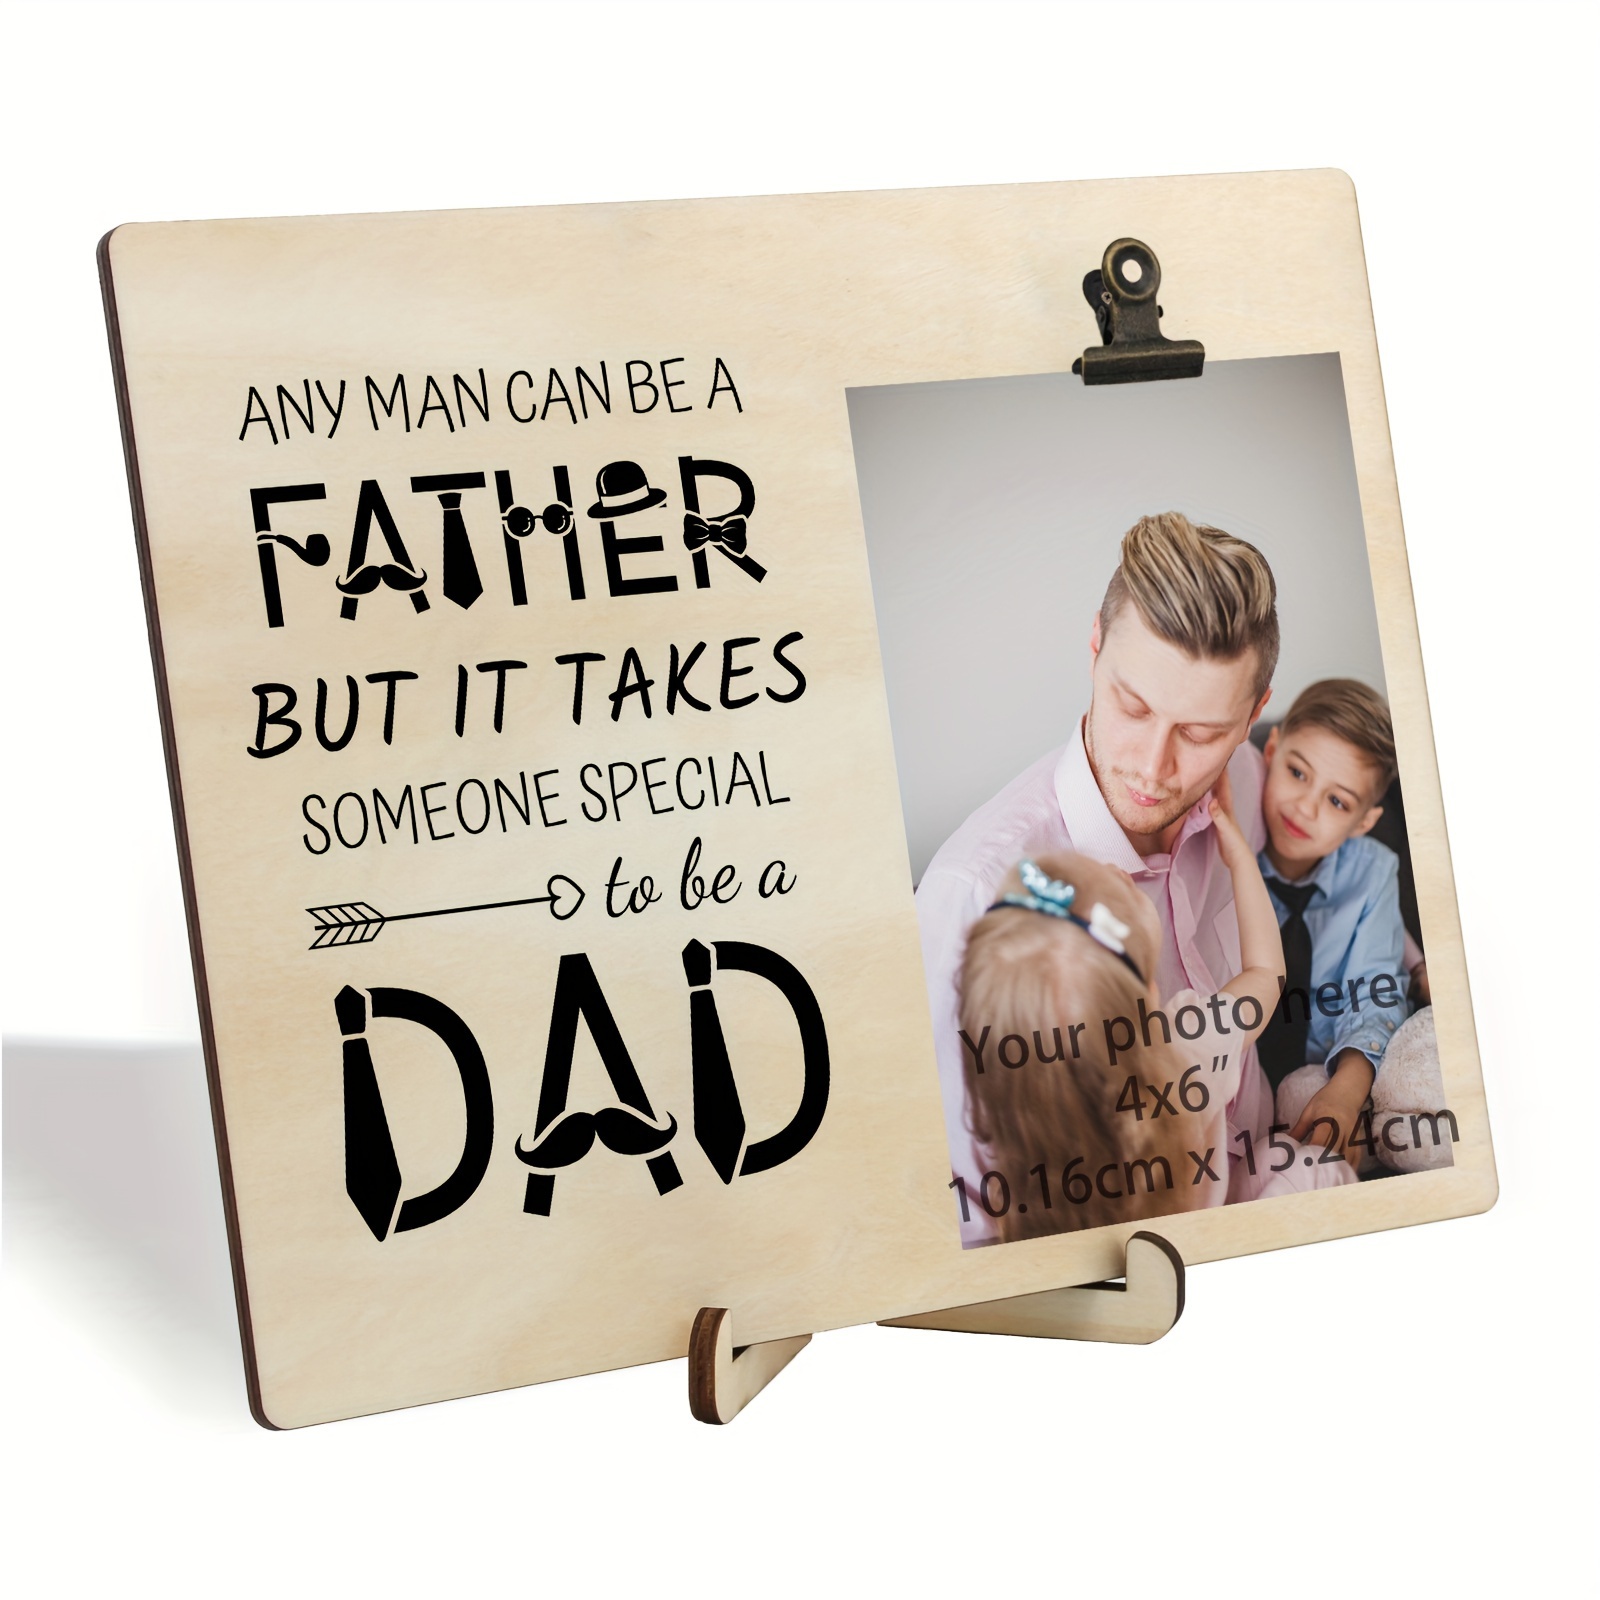 

1pc Gifts For Dad Fathers Day, Any Man Can Be A Father, But It Takes Someone Special To Be A Dad - Engraved Natural Wood Picture Frame, Father Of The Groom, Display Photo 4x6/10x15cm Inch